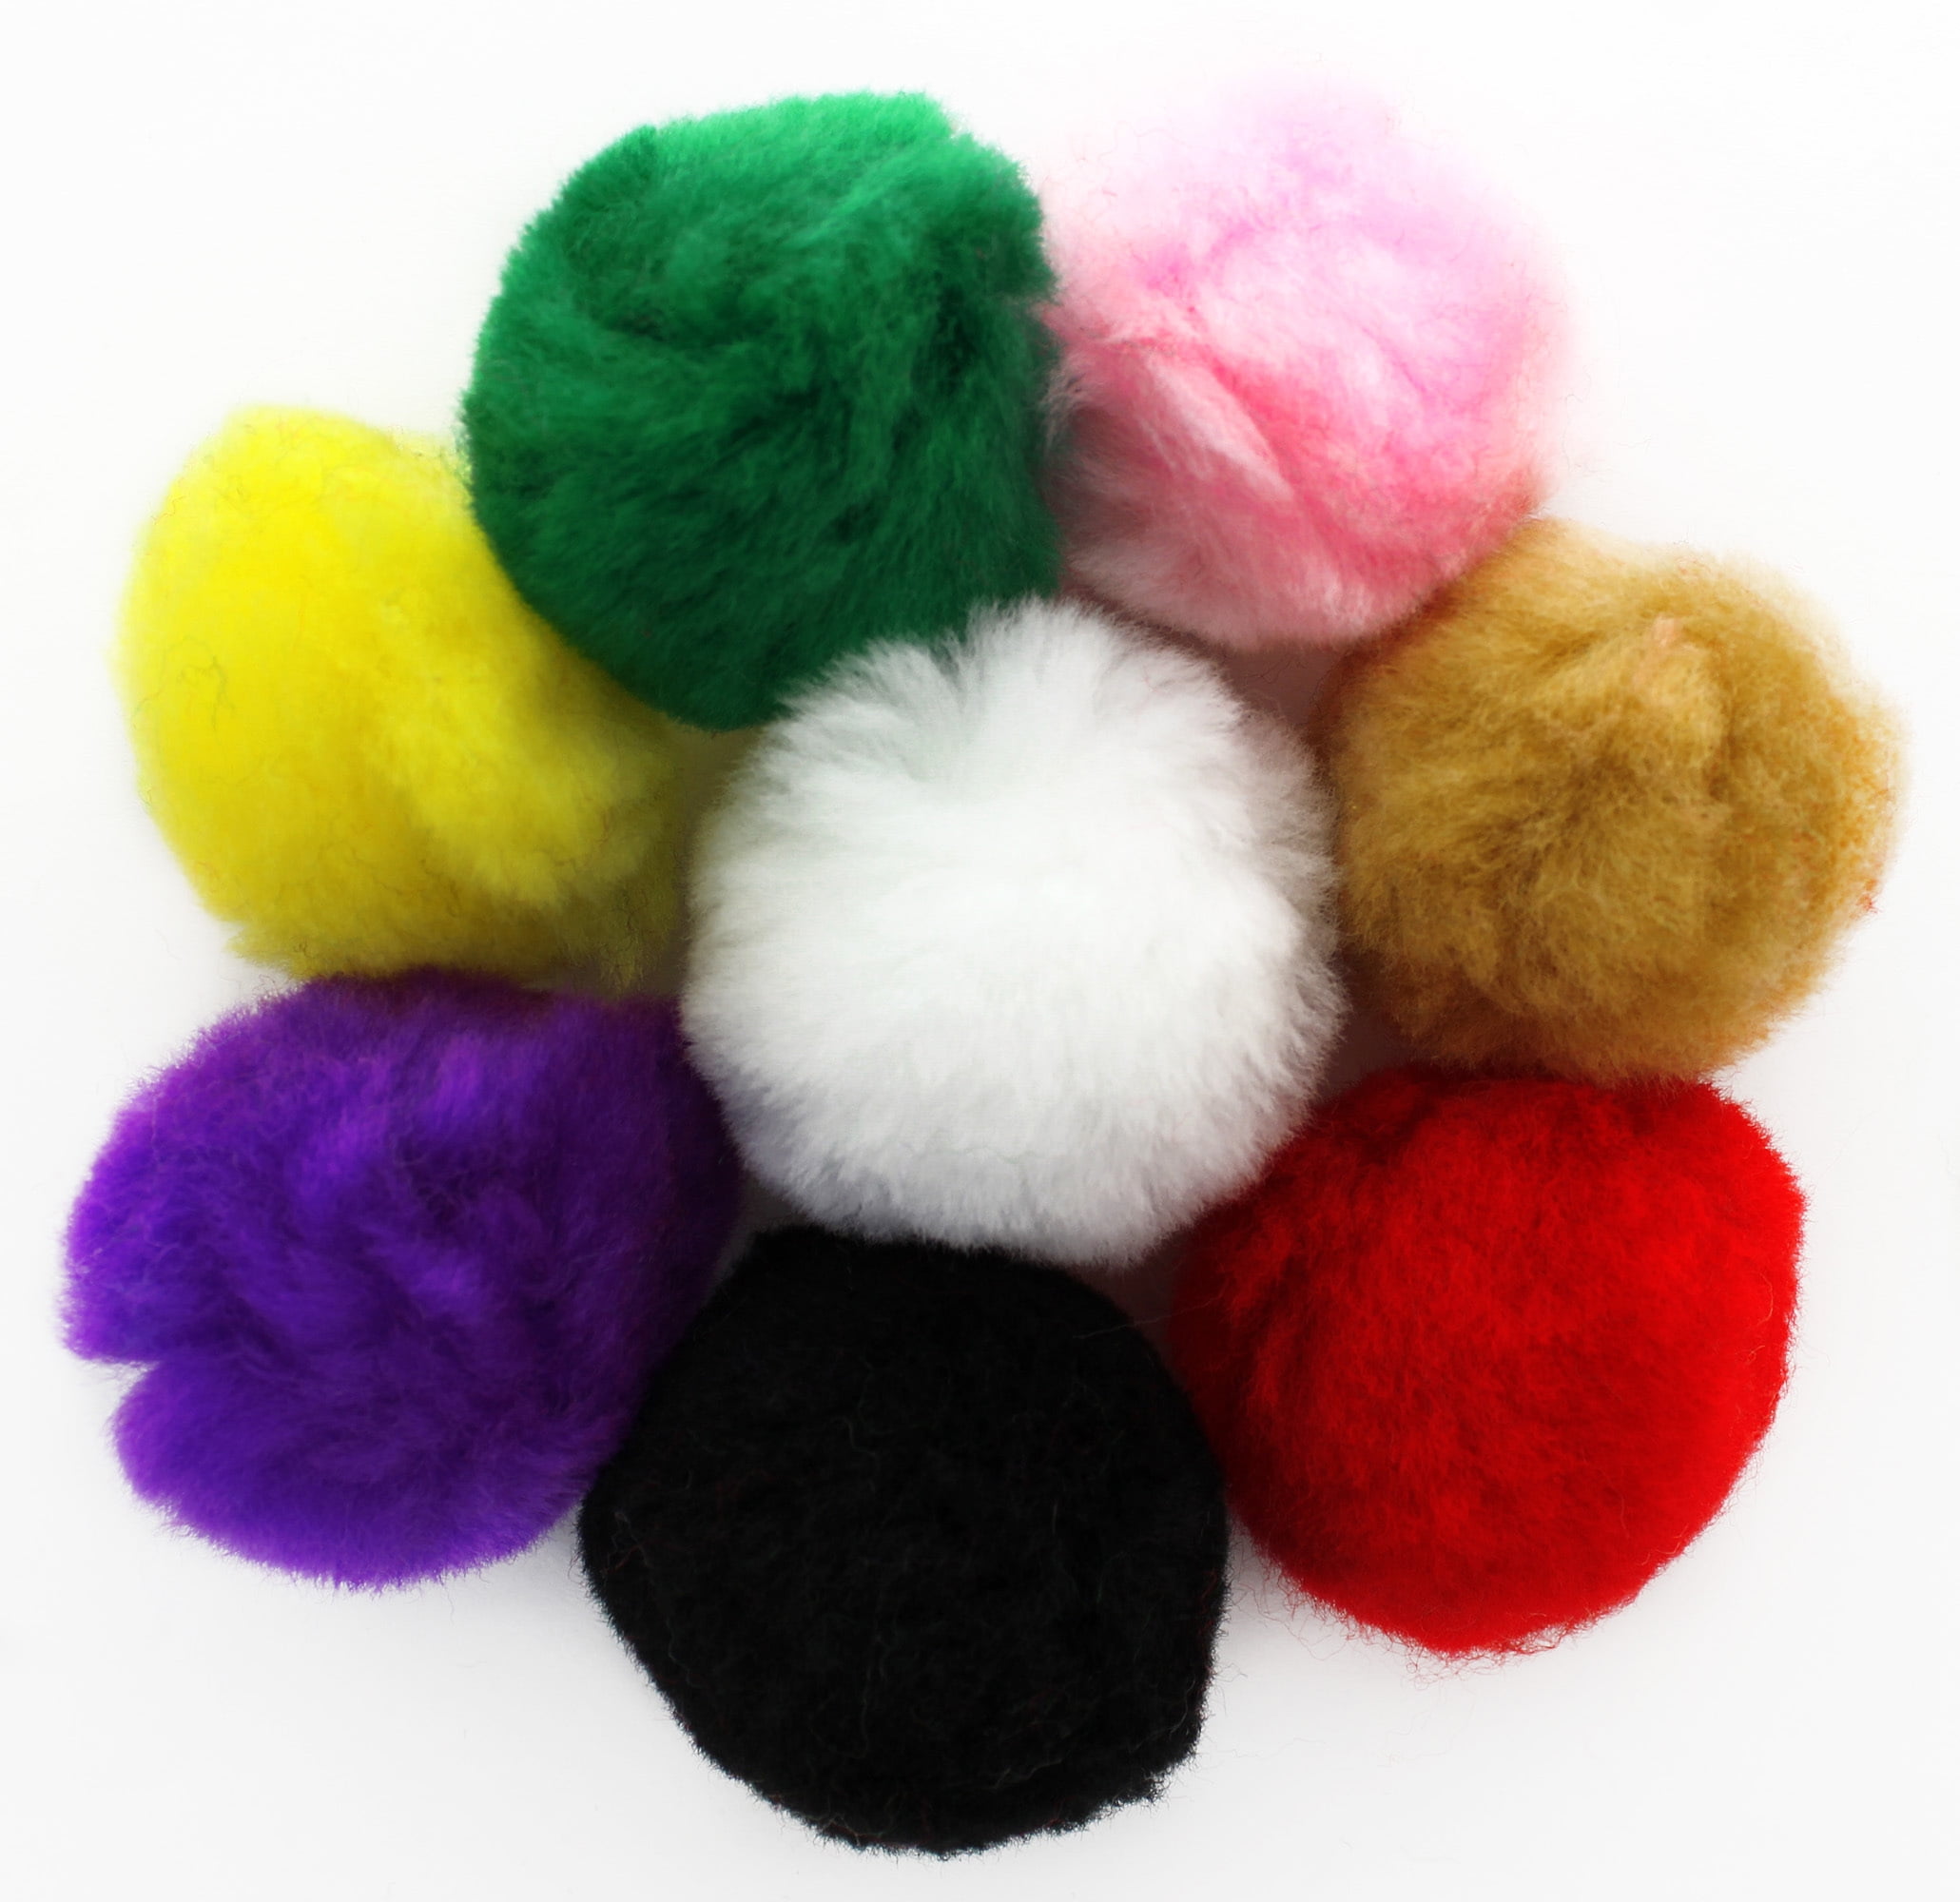 Essentials by Leisure Arts 3 in. Pom Poms - Red 4 Pc.